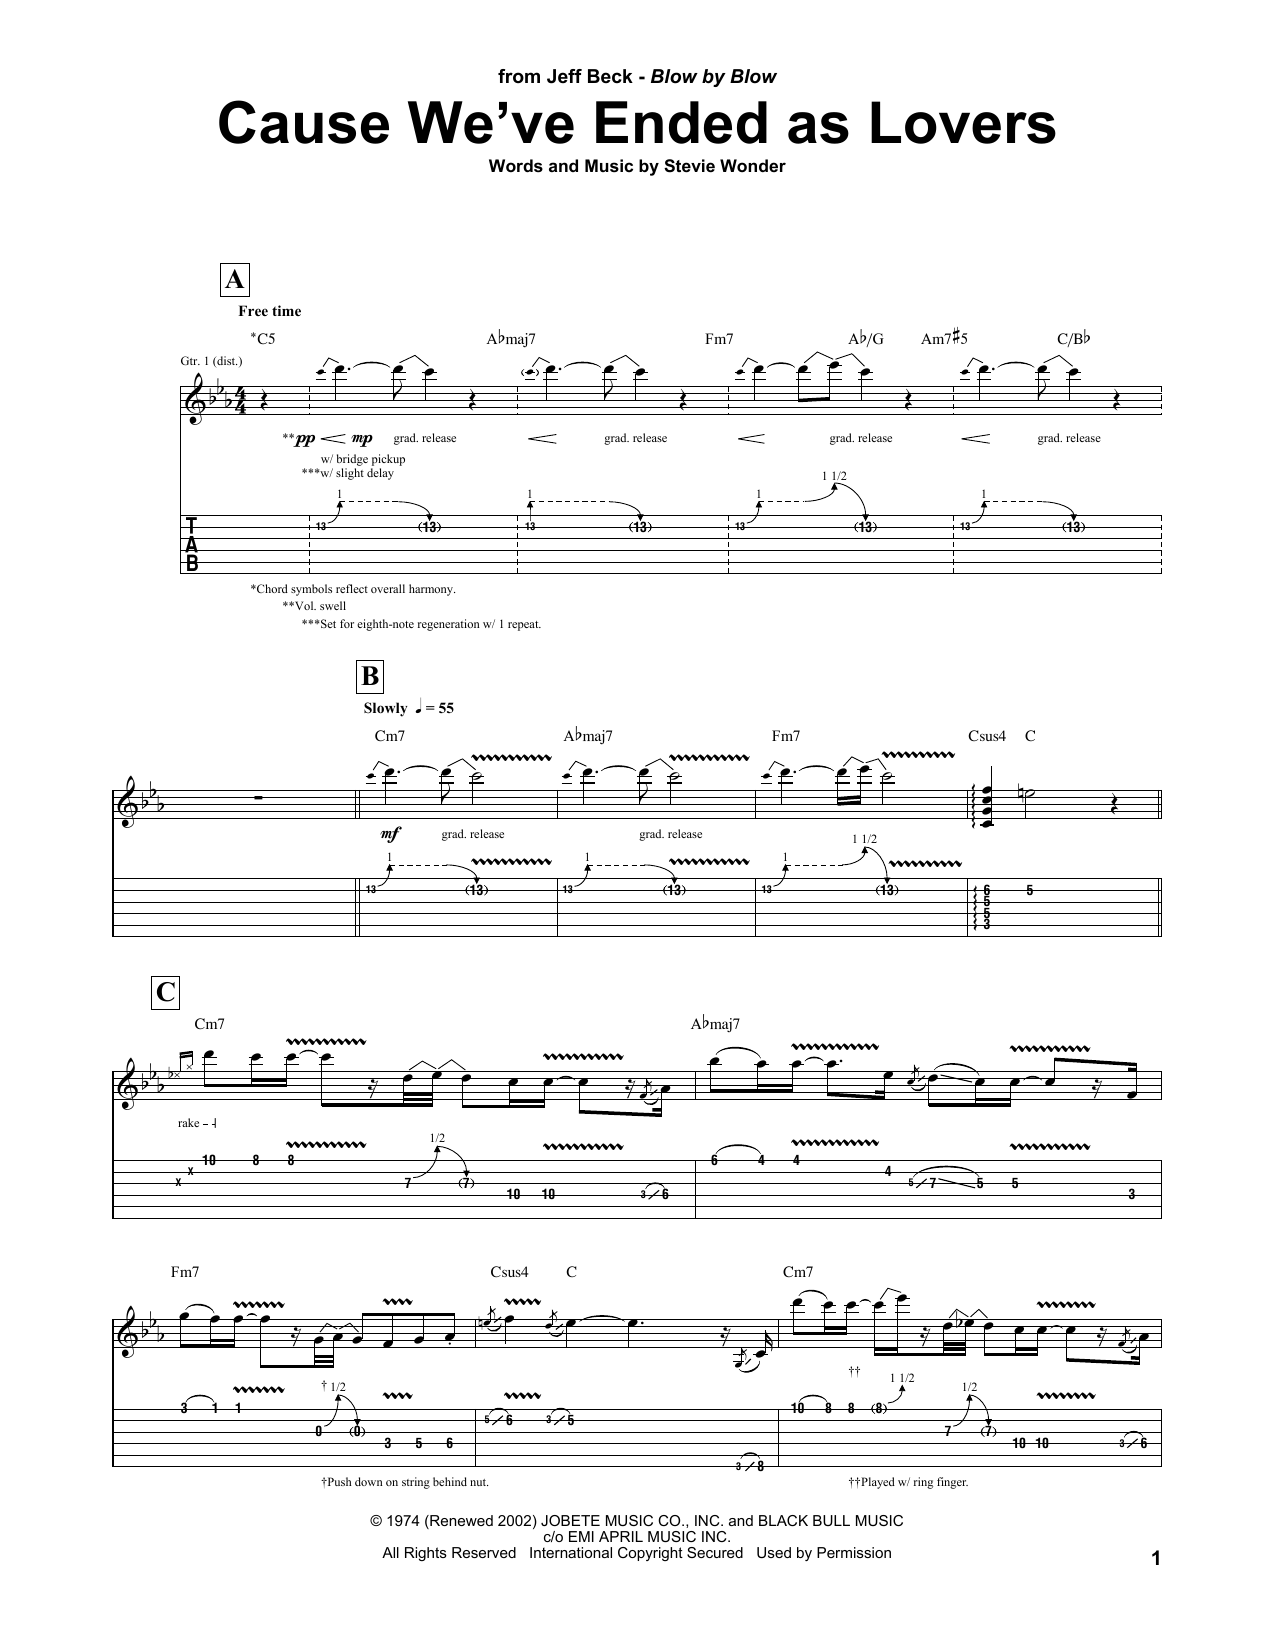 Download Jeff Beck Cause We've Ended As Lovers Sheet Music